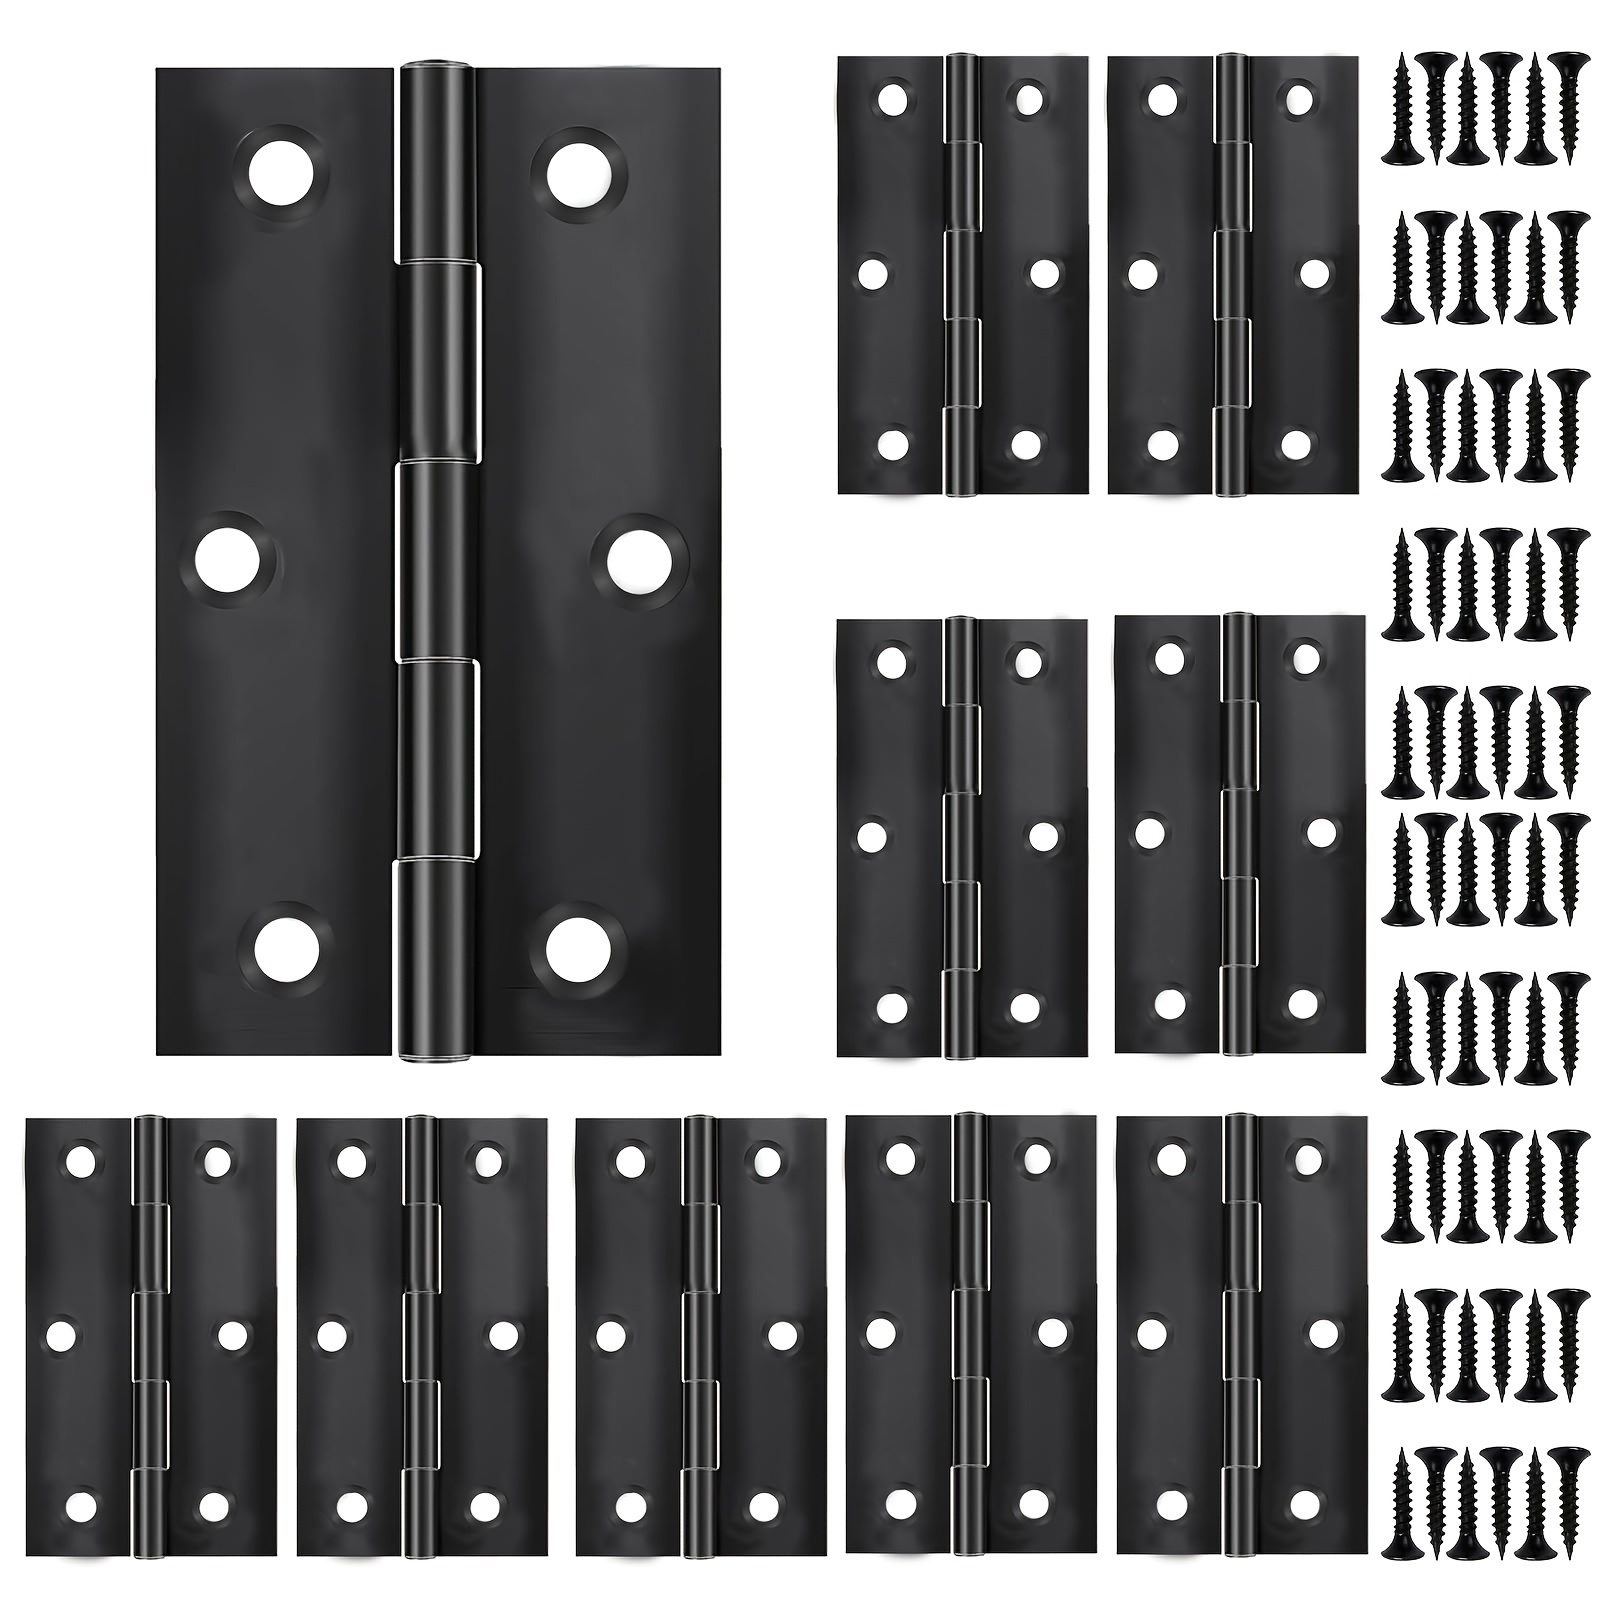 6Pack Butt Hinge 1 Inch Mini Hinges 304 Stainless Steel Hinges